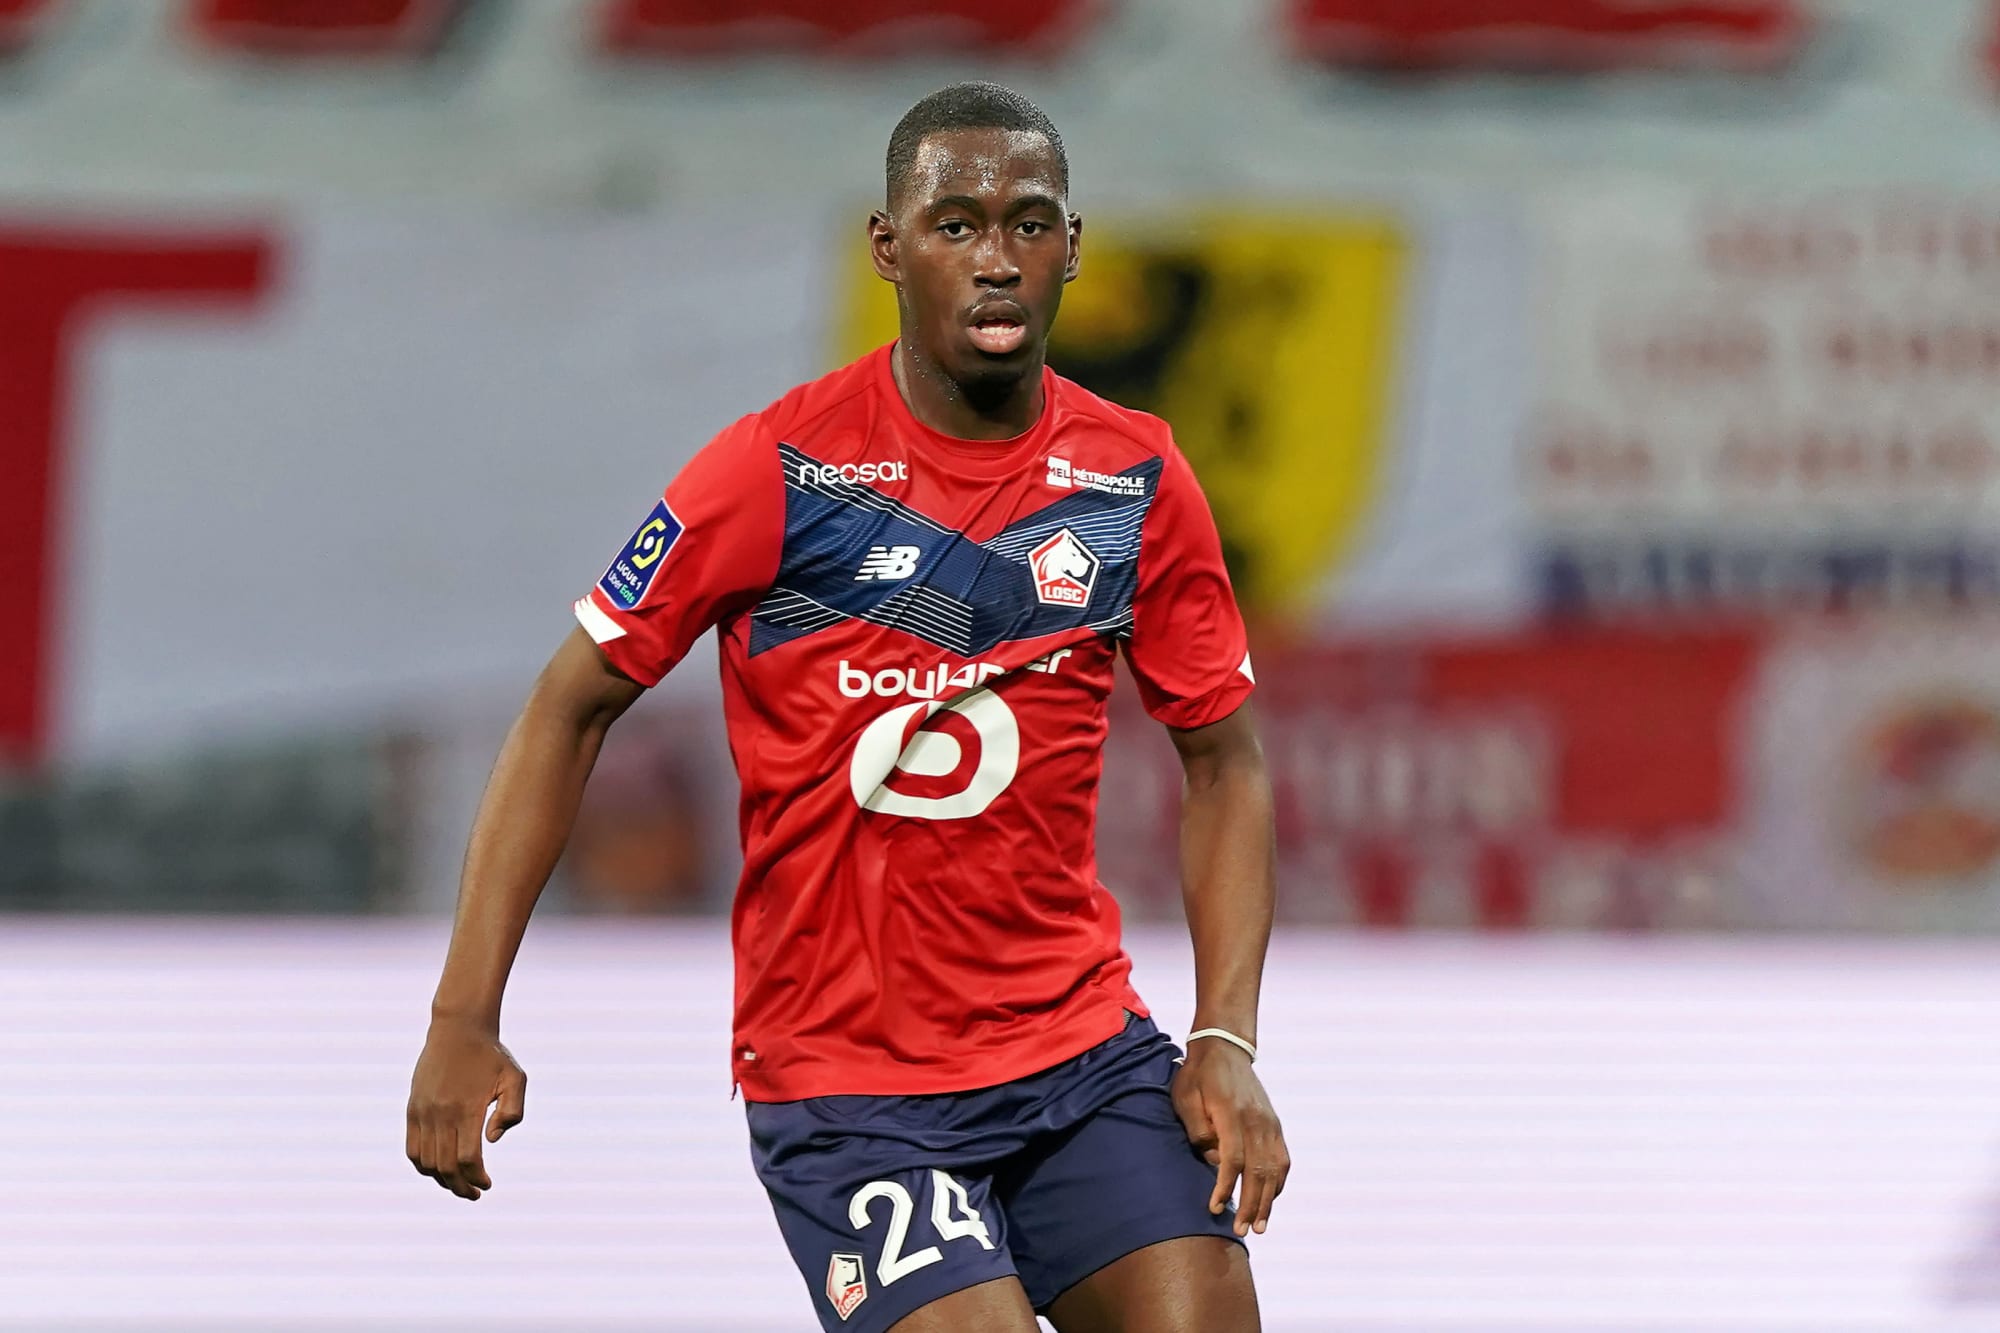 Leicester will beat Everton to Soumare as they win race for Frenchman